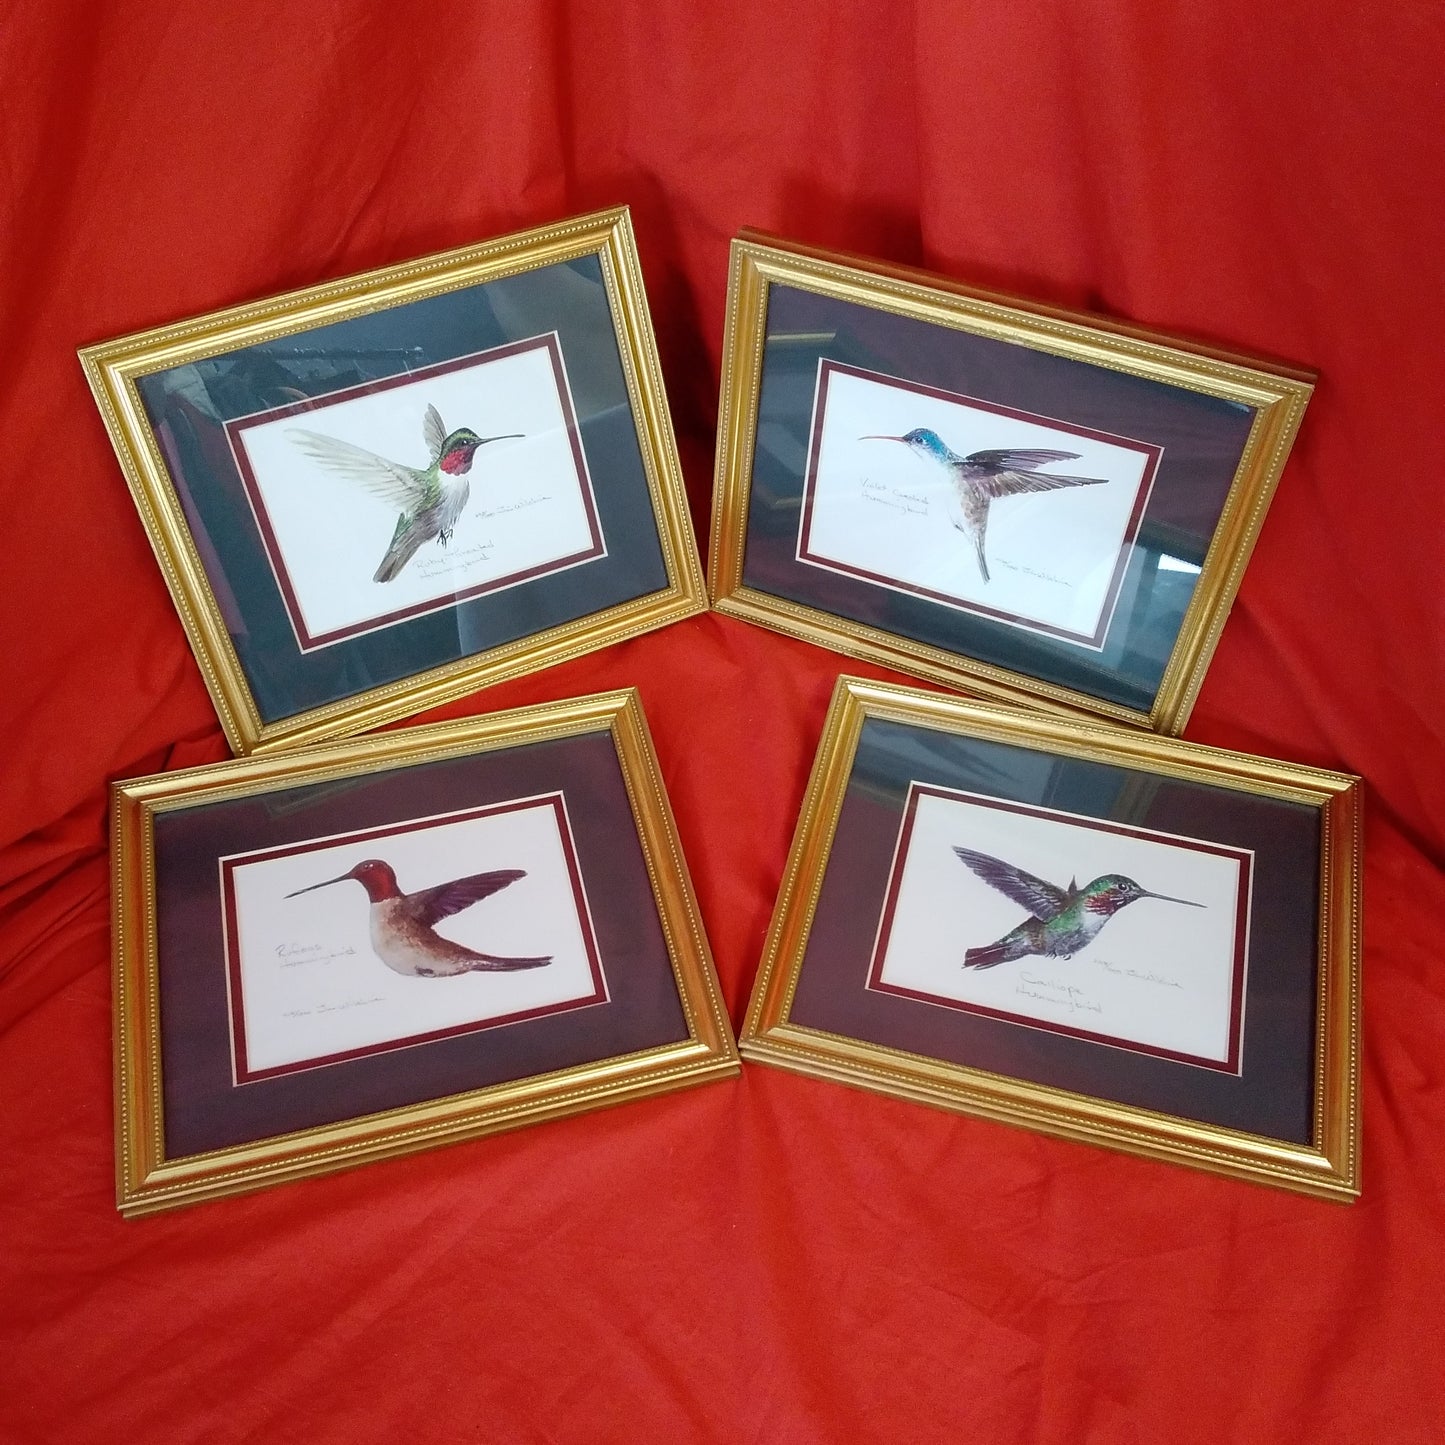 Lot of 4 Framed Signed and Numbered Hummingbird Prints by Jim Wilshire